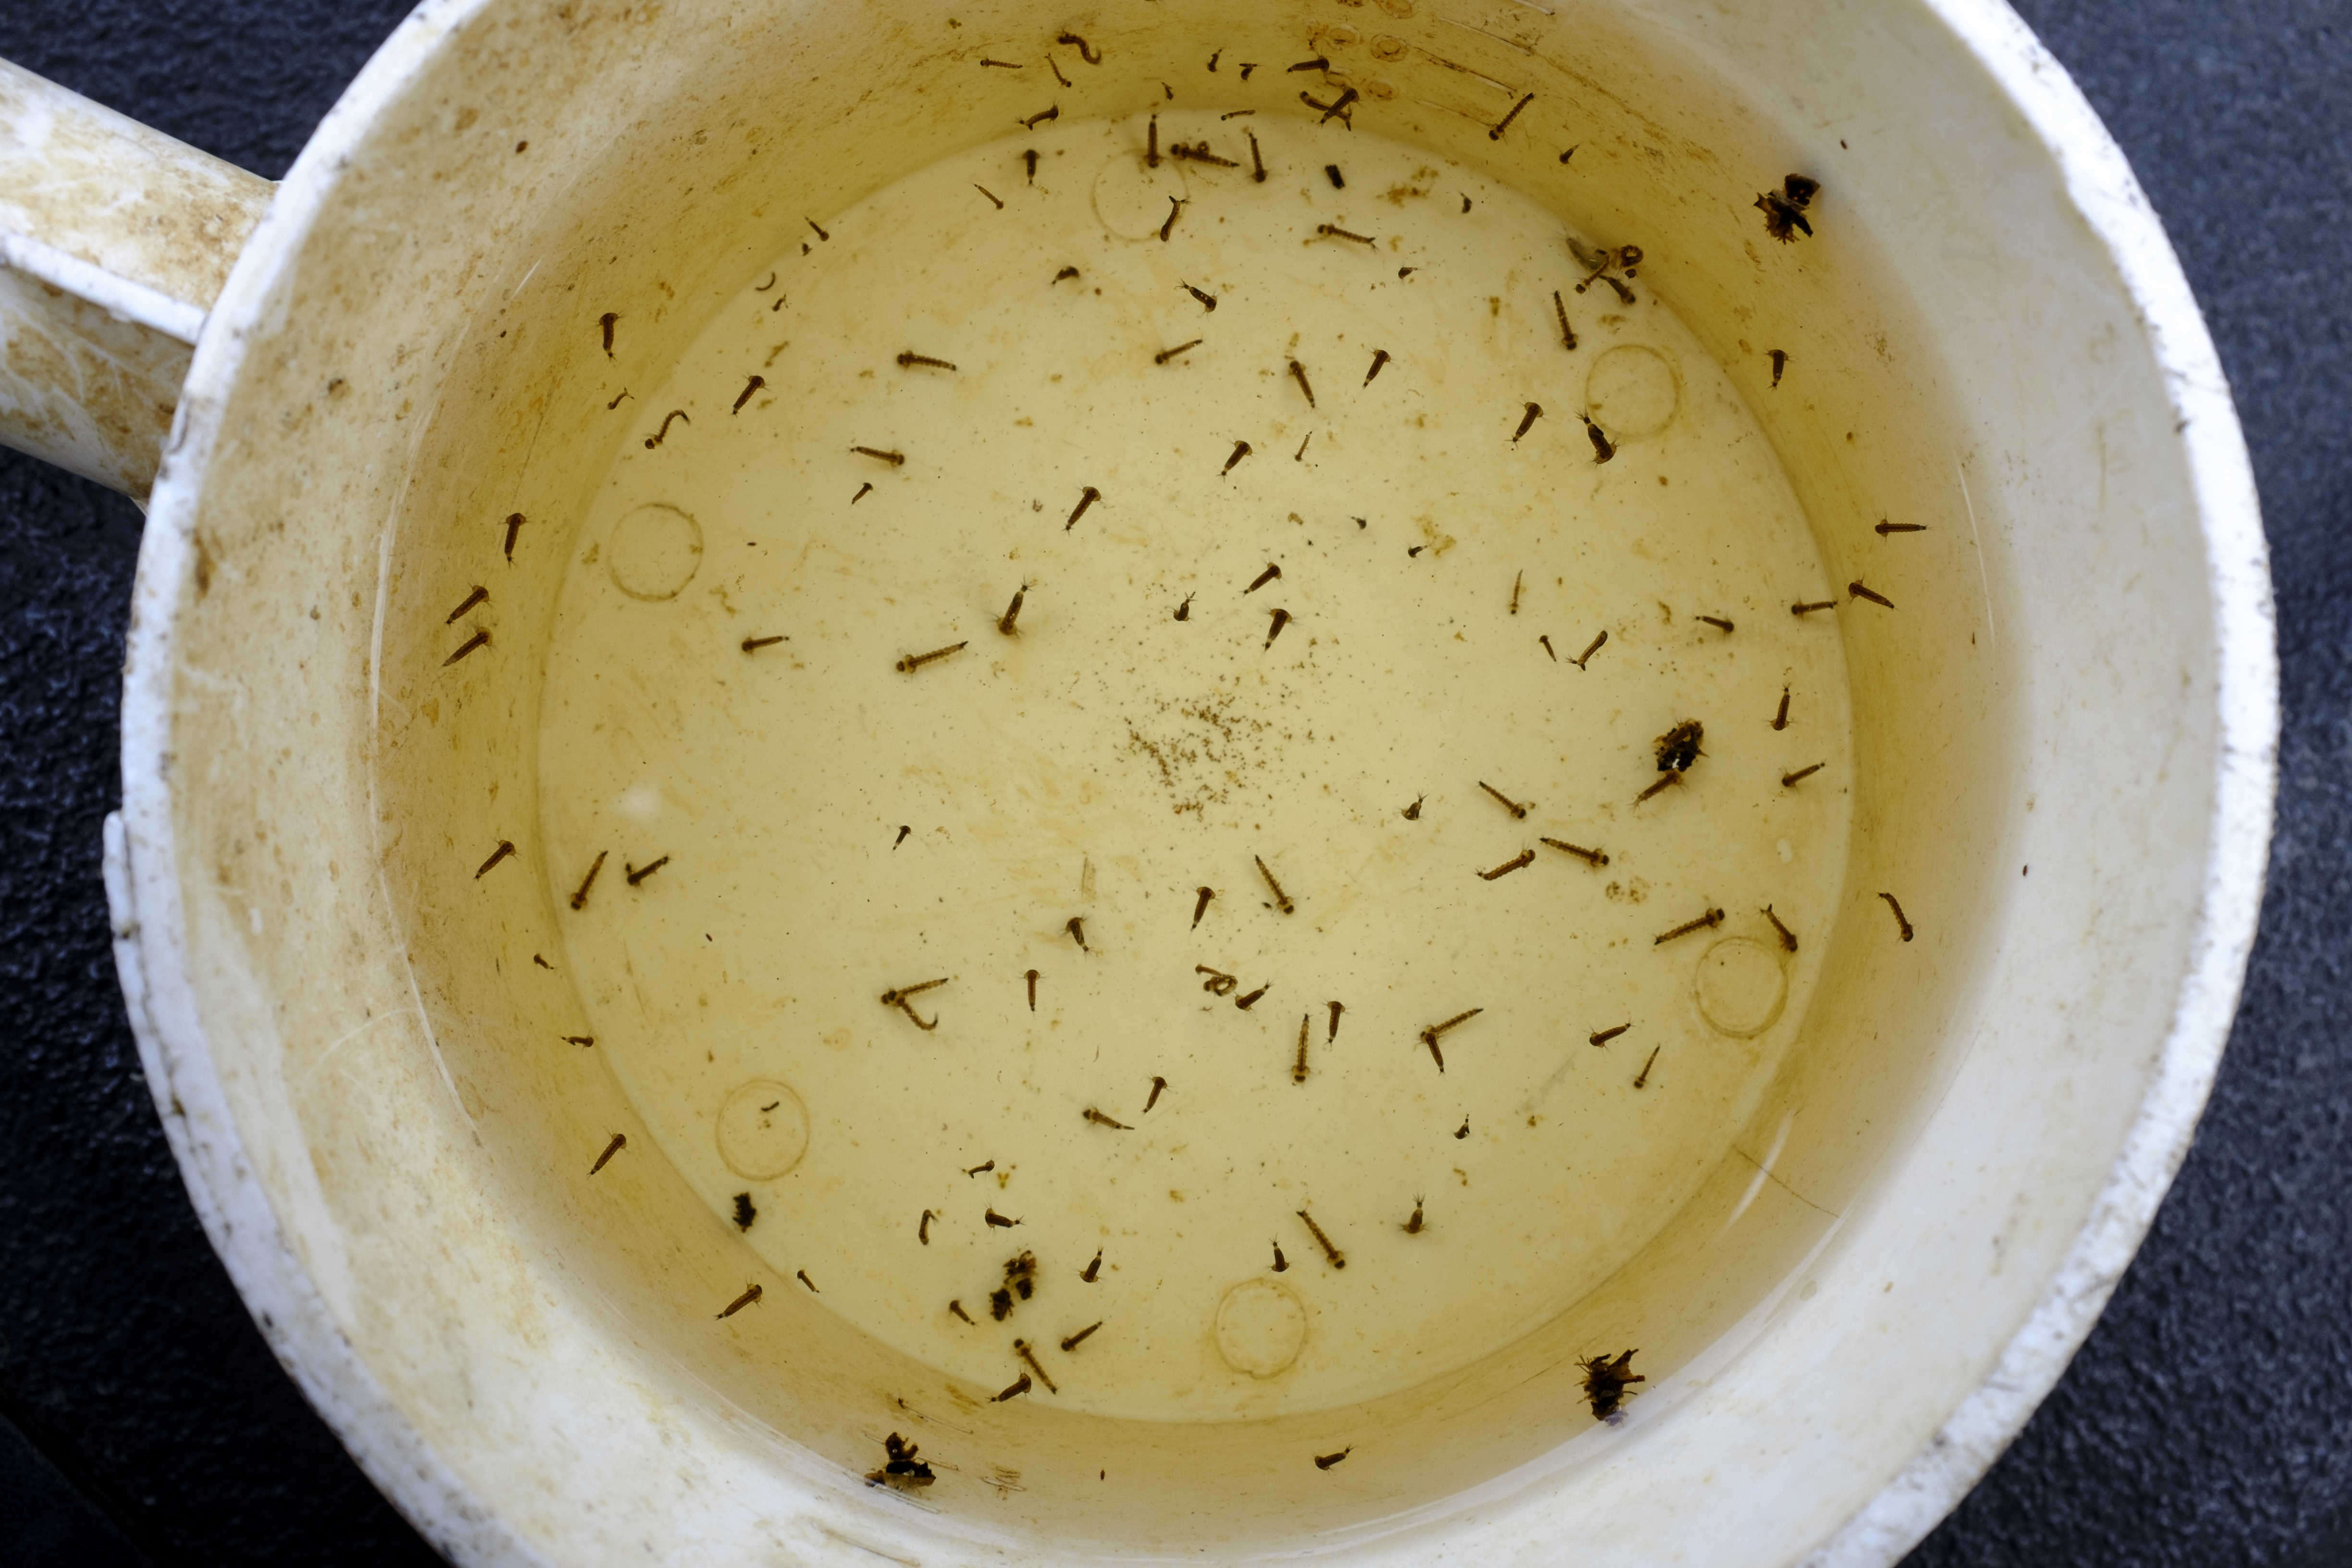 Mosquito larvae and pupae in a bowl of water